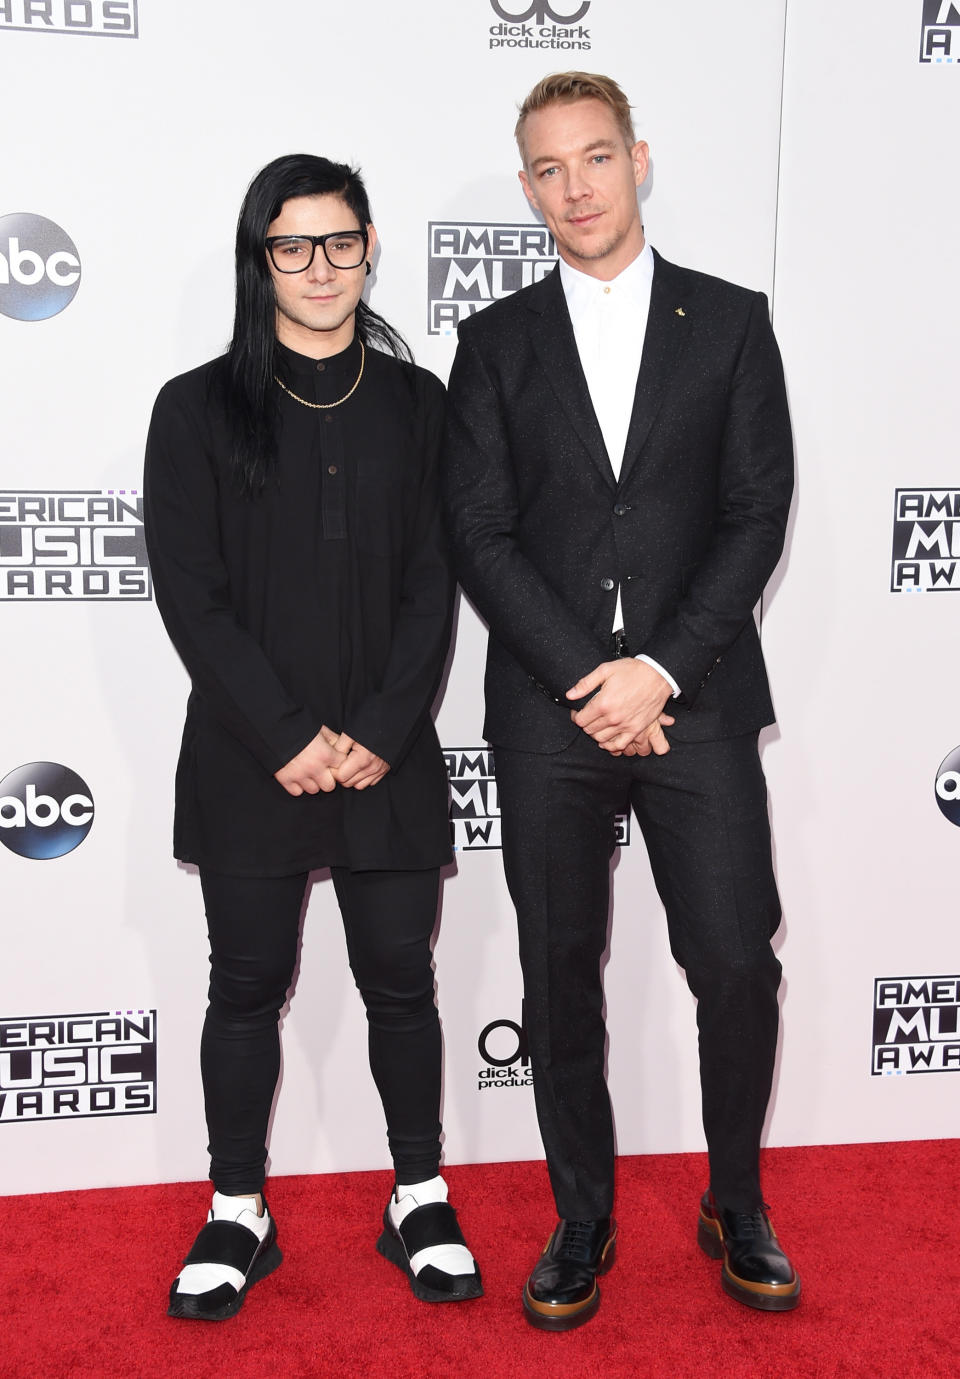 LOS ANGELES, CA - NOVEMBER 22: Recording artists Skrillex (L) and Diplo attend the 2015 American Music Awards at Microsoft Theater on November 22, 2015 in Los Angeles, California. (Photo by Jason Merritt/Getty Images)